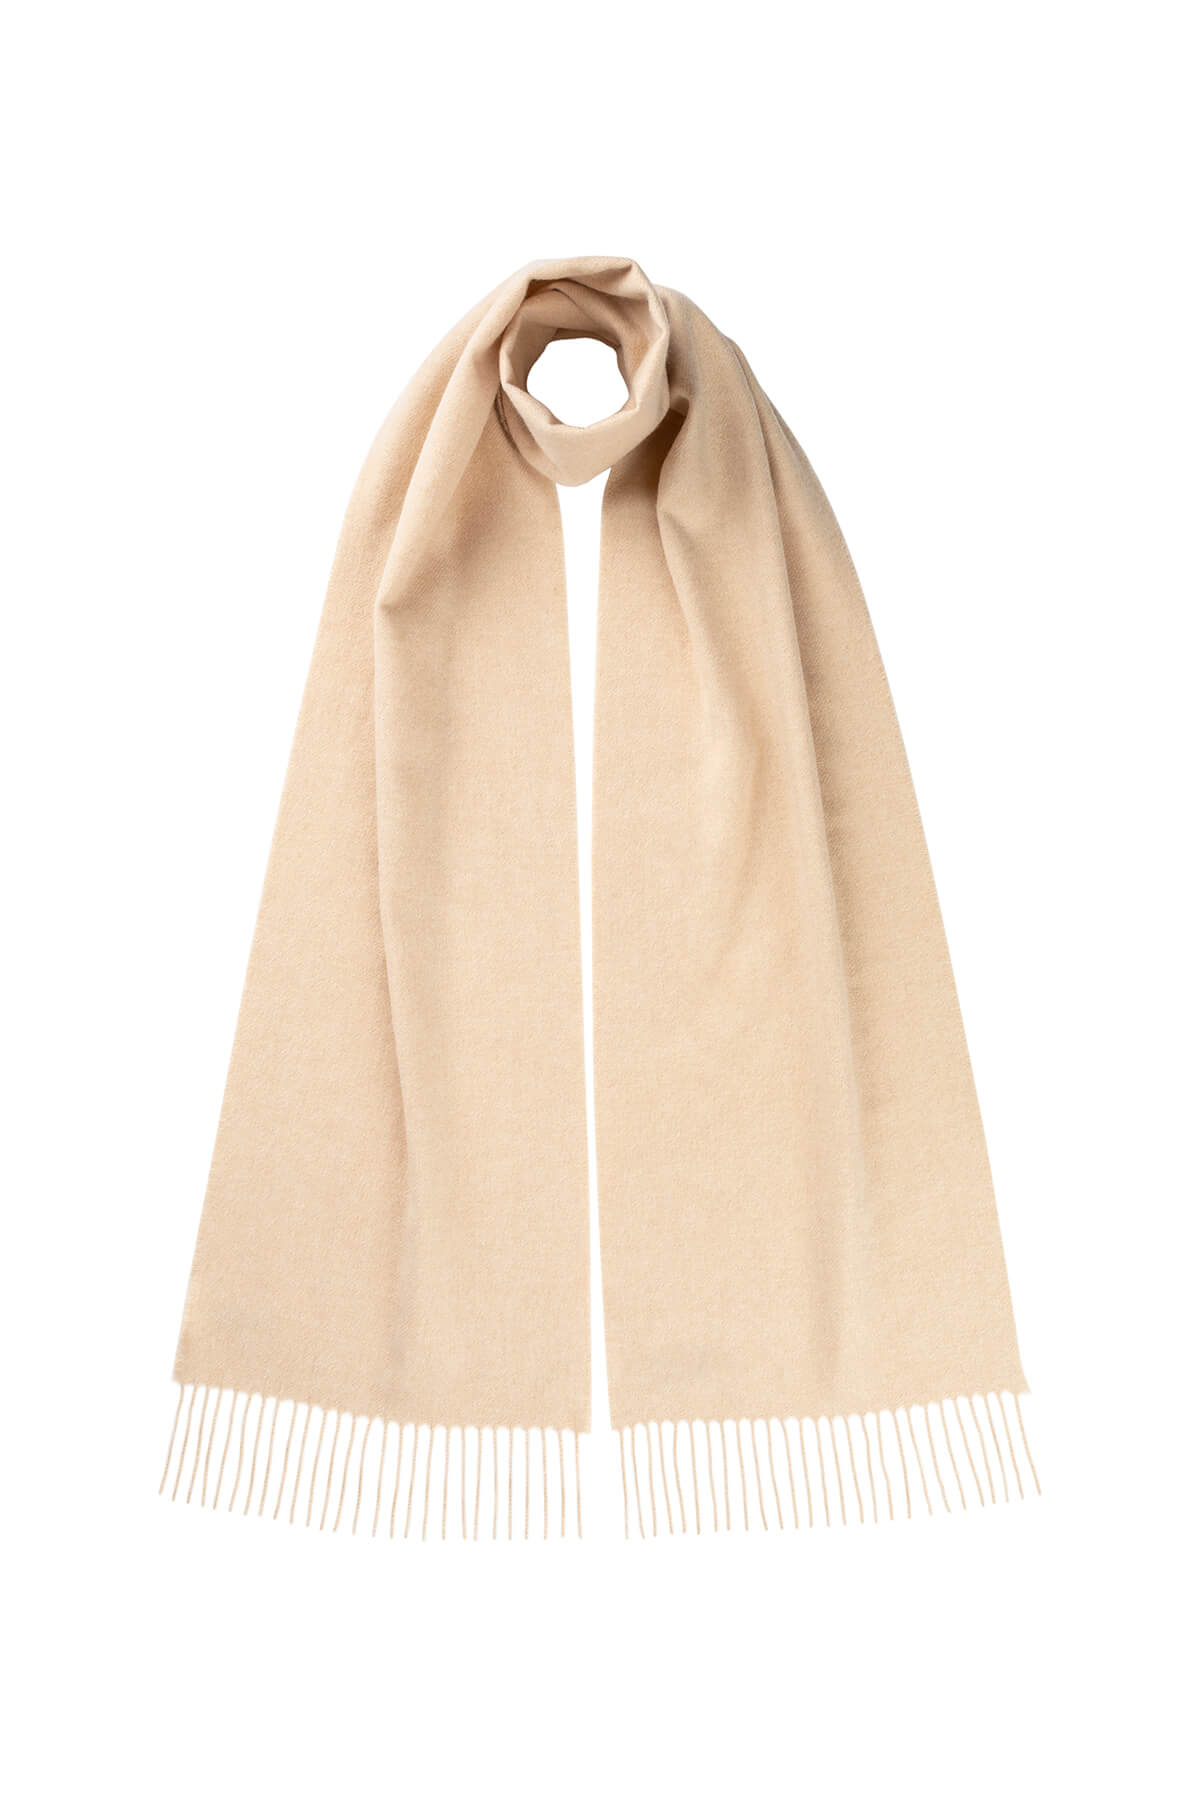 Johnstons of Elgin Cashmere Scarf in Blonde on a white background WA000016HB0167ONE